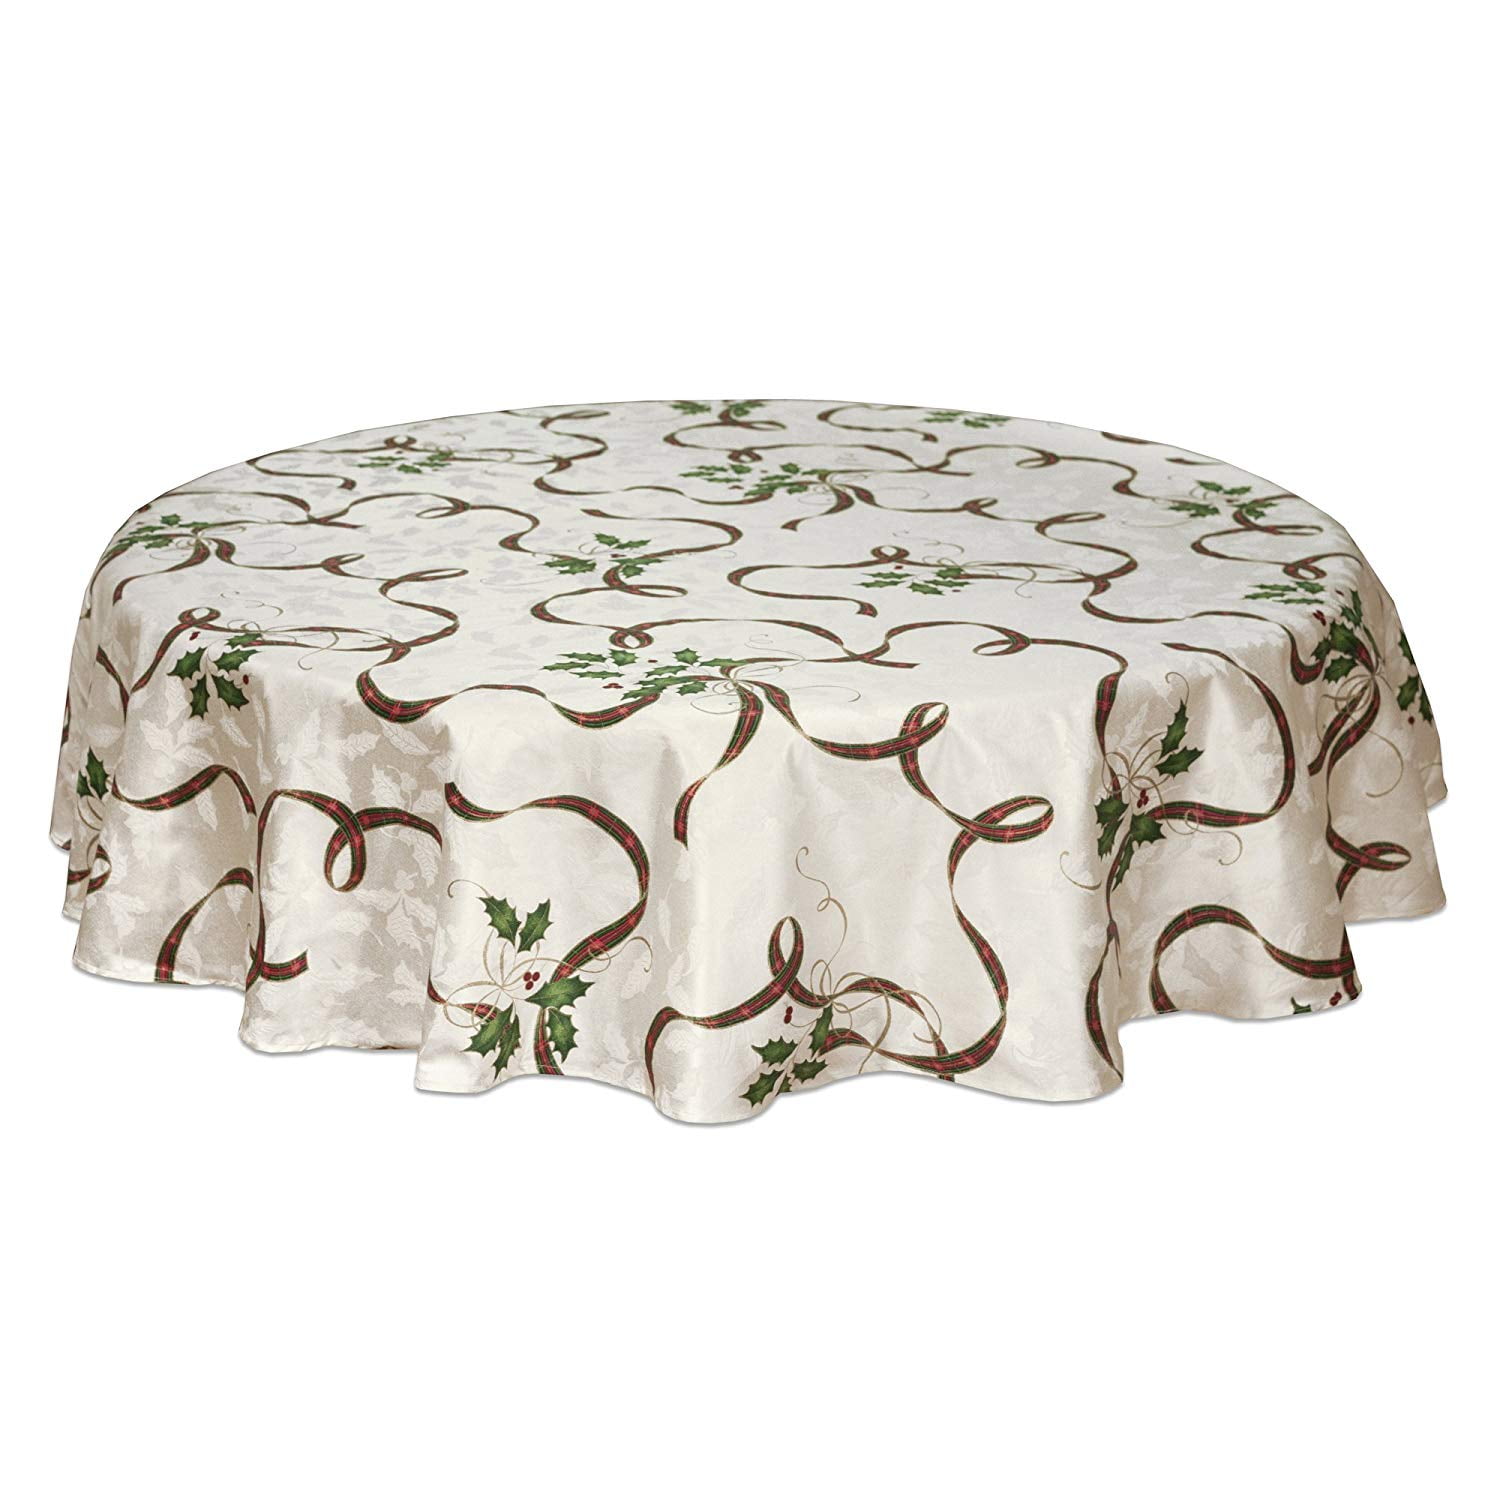 Lenox Holiday Nouveau Table Cloth by Off-White/White 60 x 104 